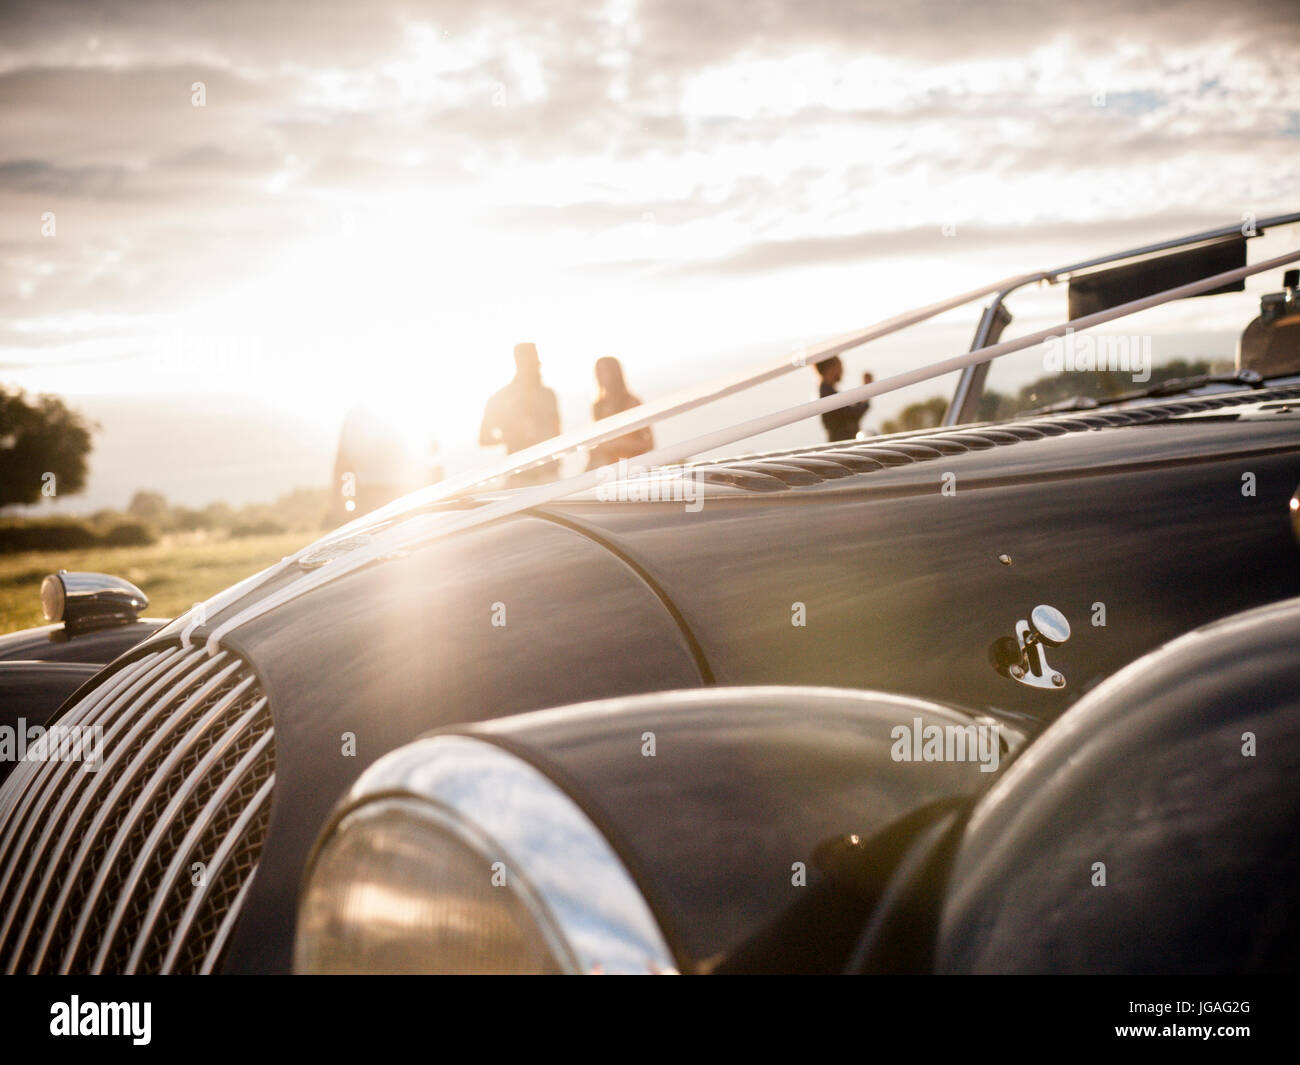 A close up of a Morgan car withh wedding ribbons on it late in the evening with sun flare and out of focus people in he background Stock Photo